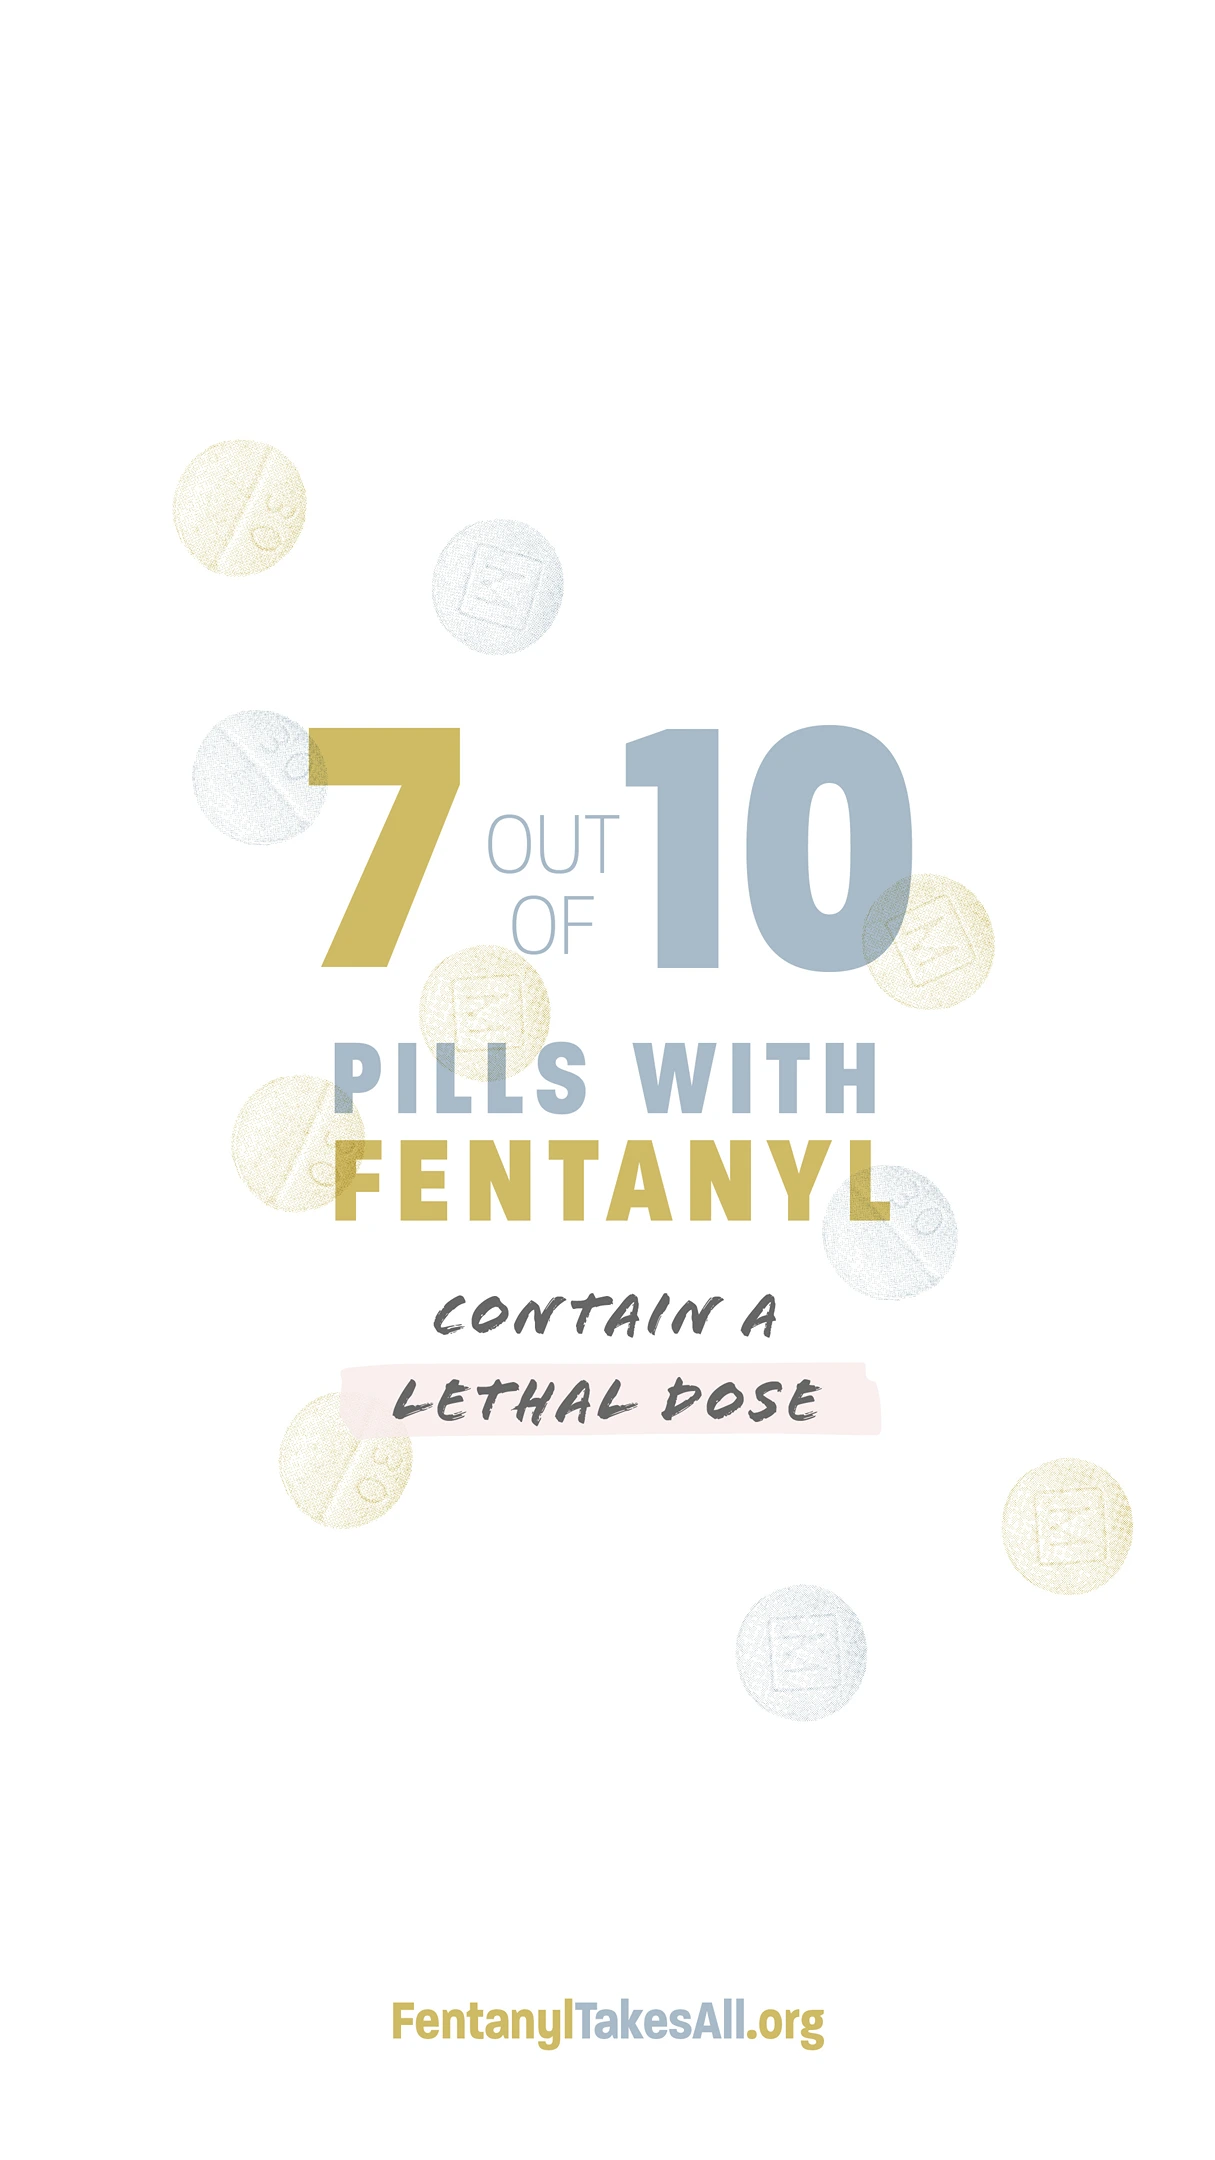 7 out of 10 pills with fentanyl contain a lethal dose.